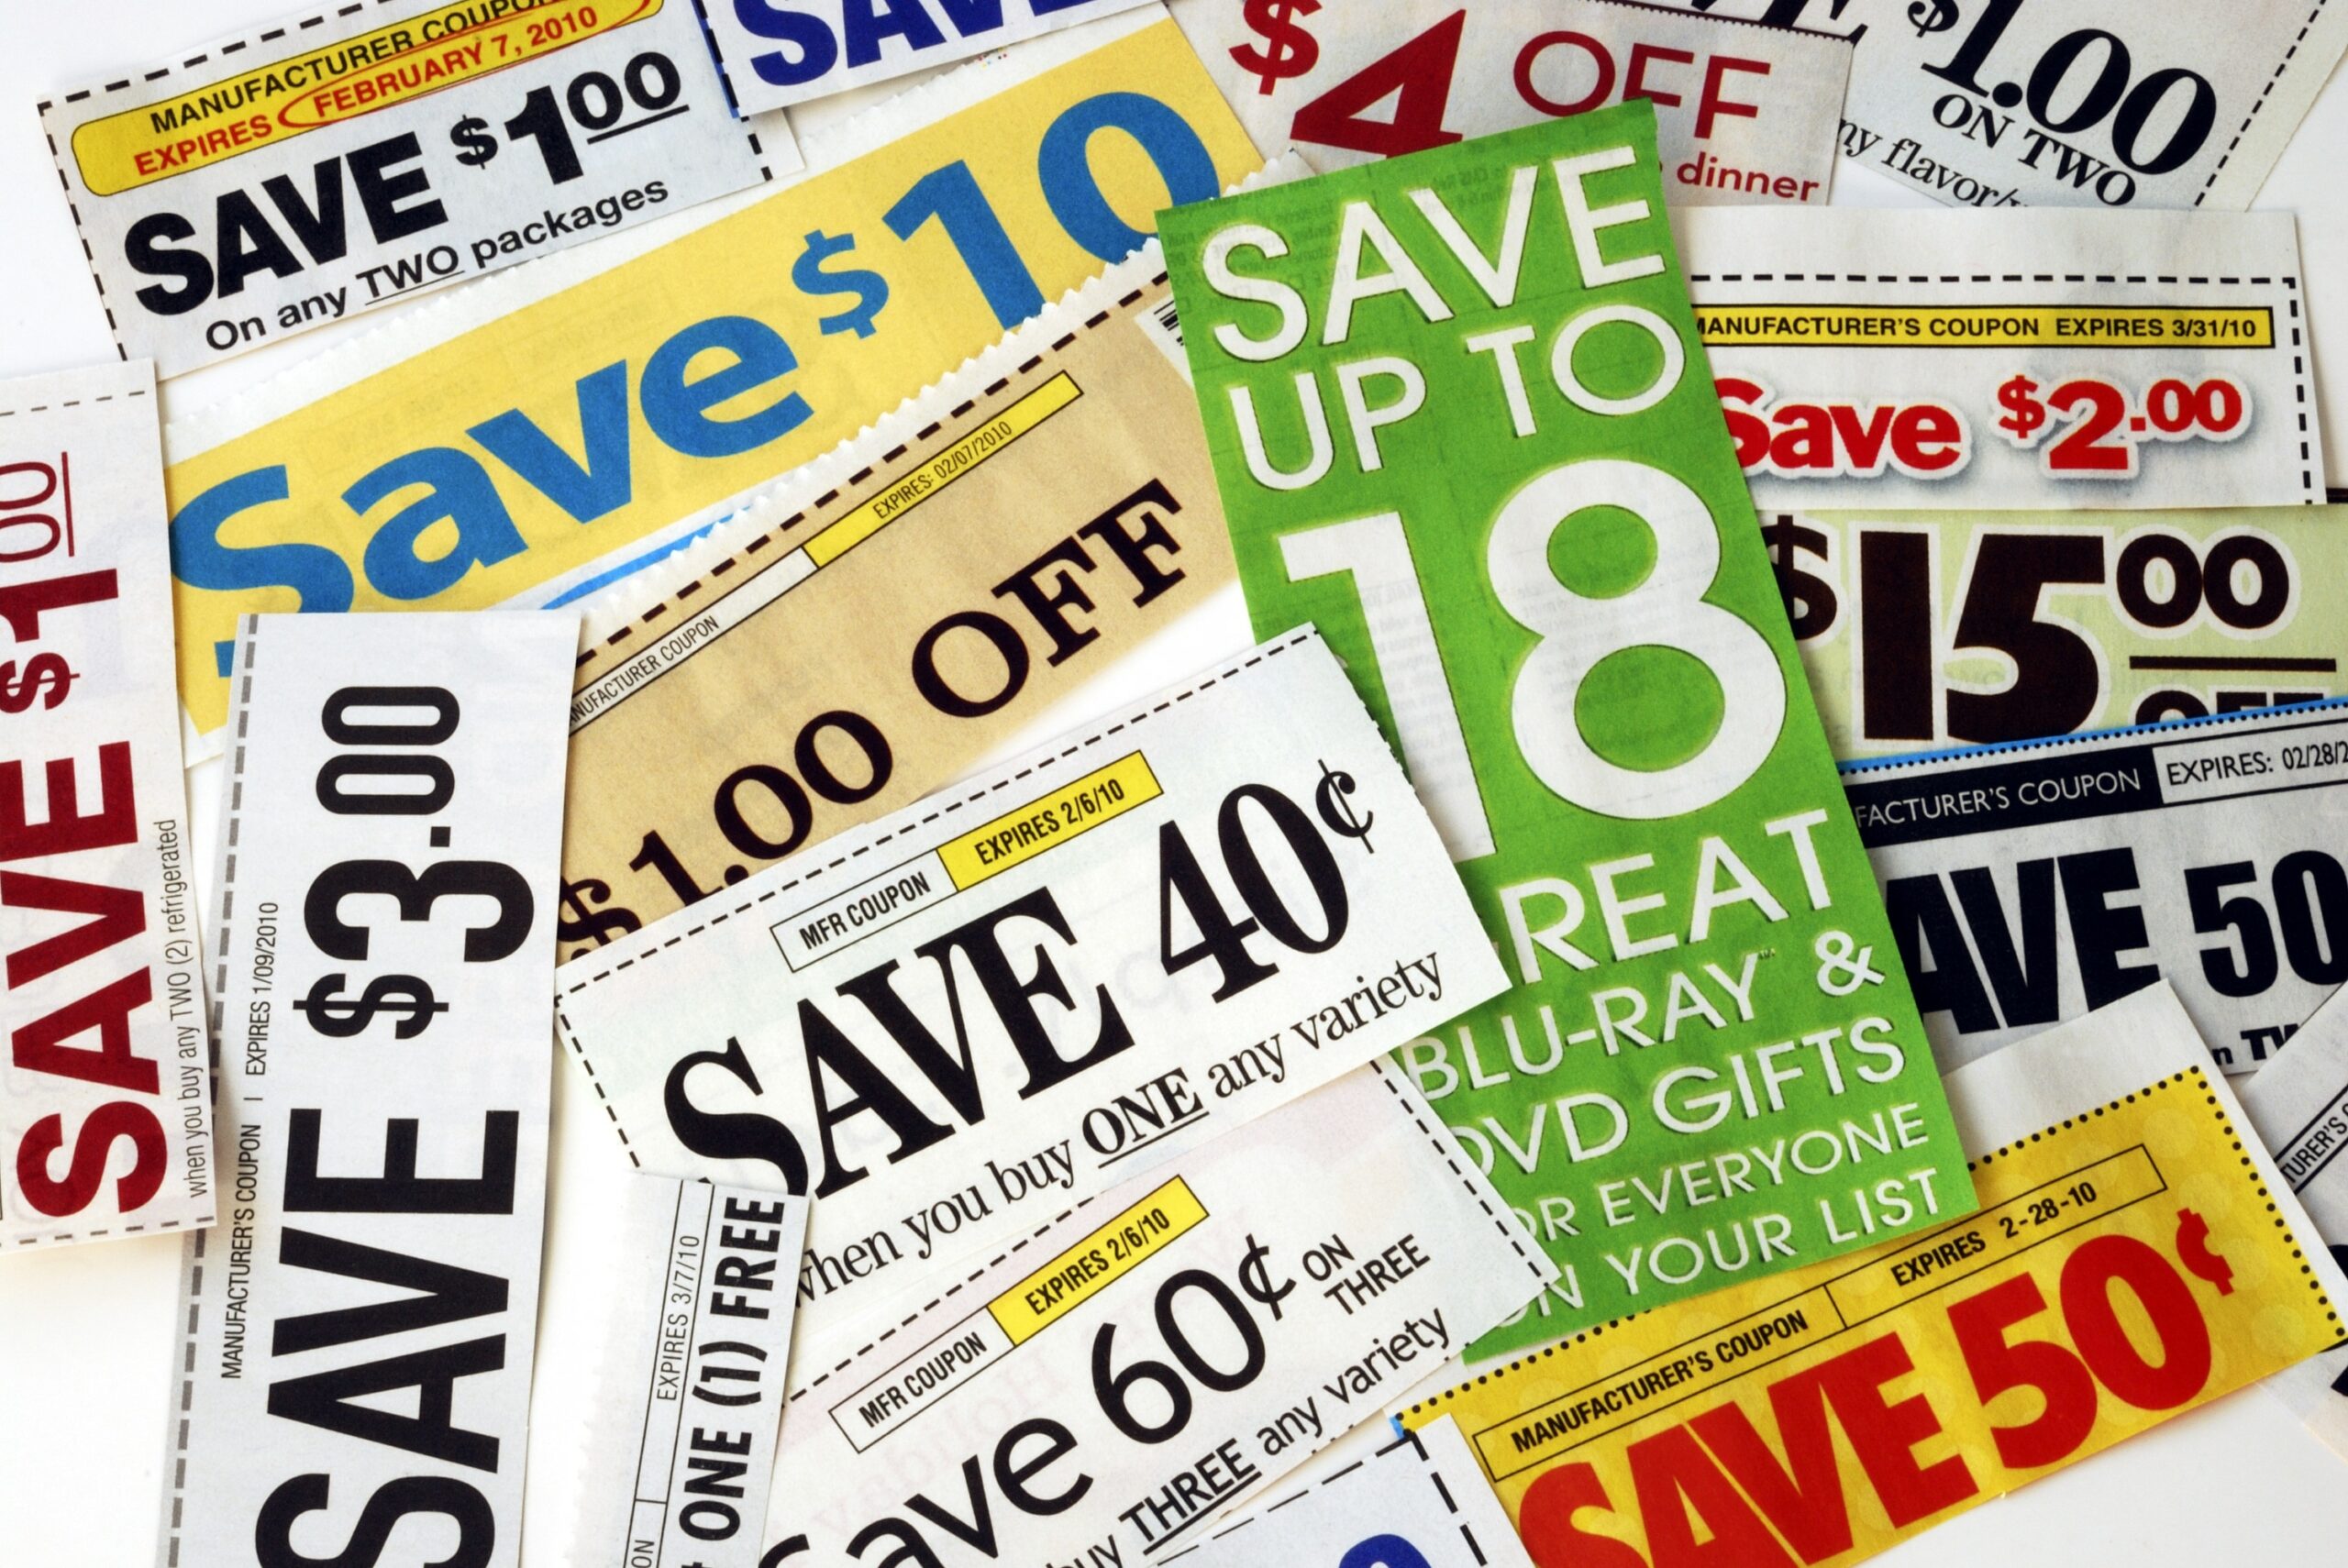 Inexpensive grocery coupons